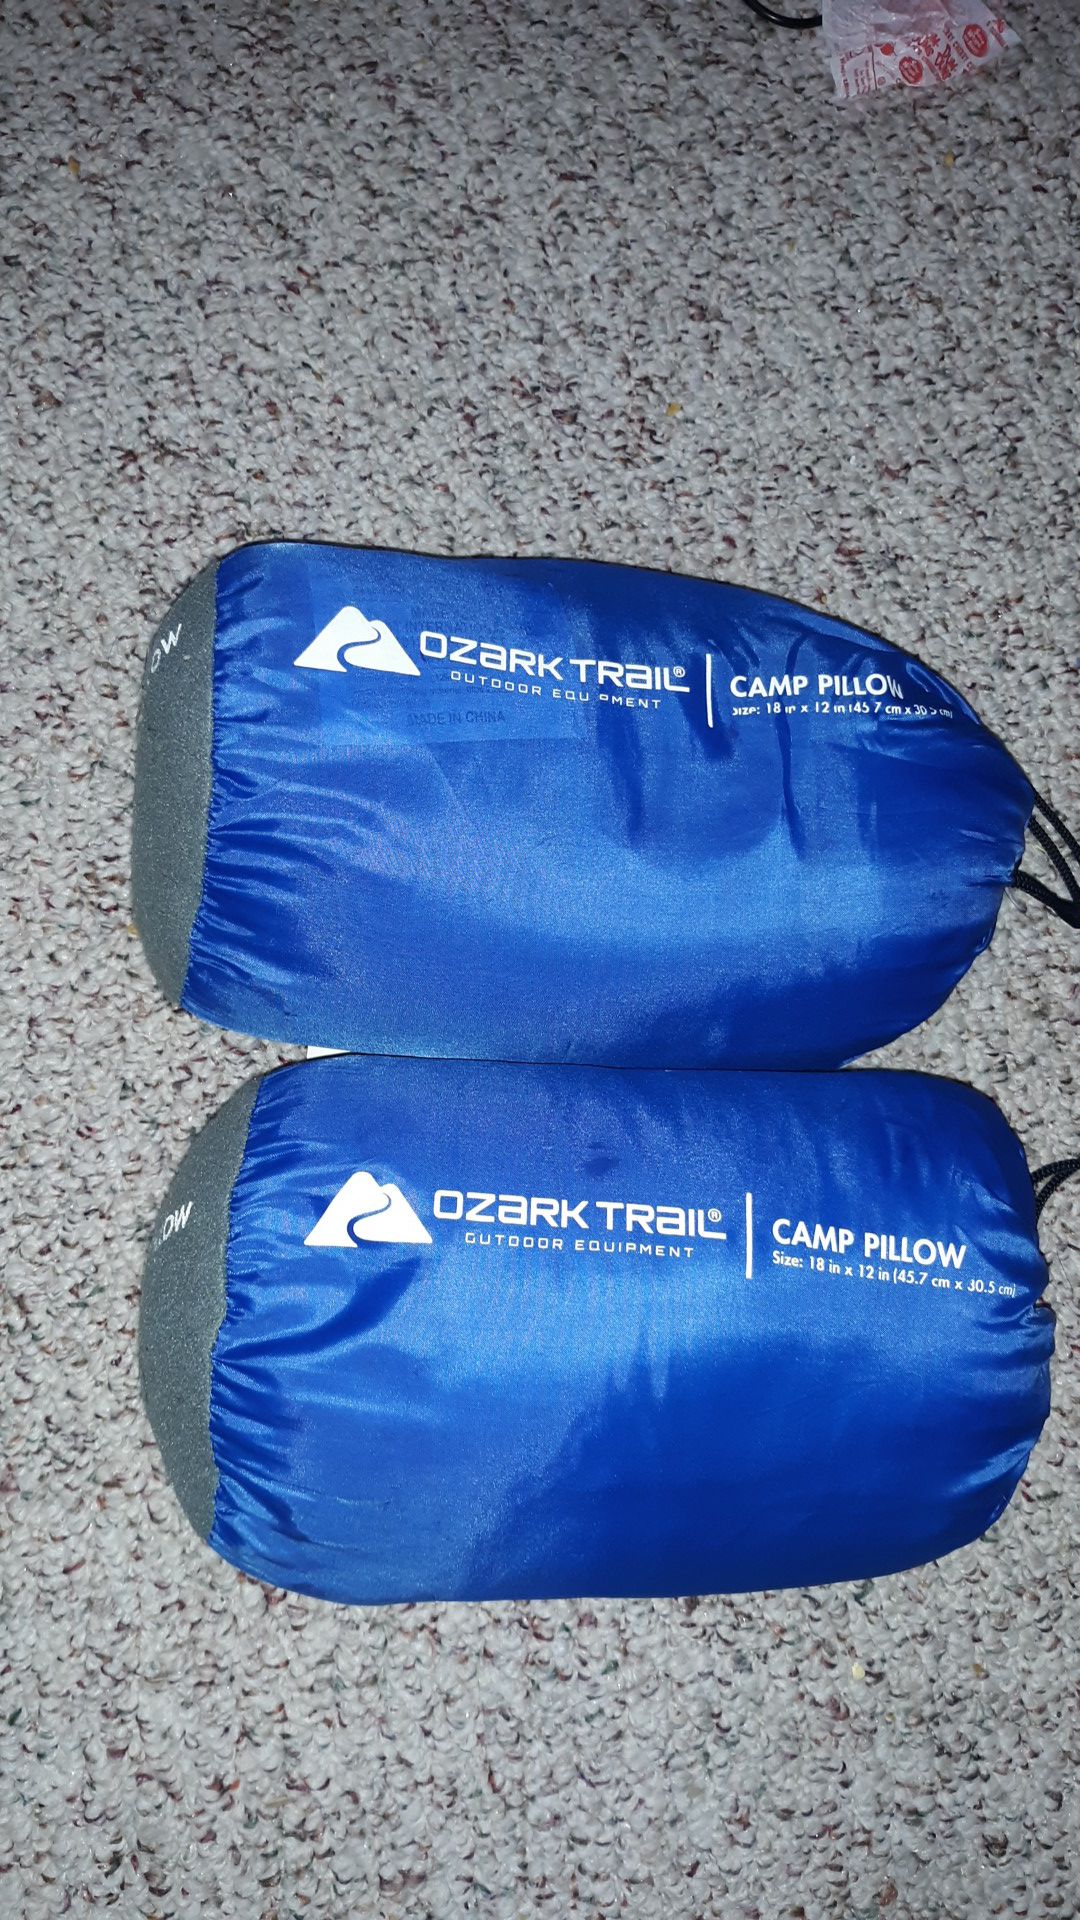 Ozark Trail Camping Packable Pillow ( 2 Pillows with a bag each of them ) Also, PLEASE check my other listing items, thanks!